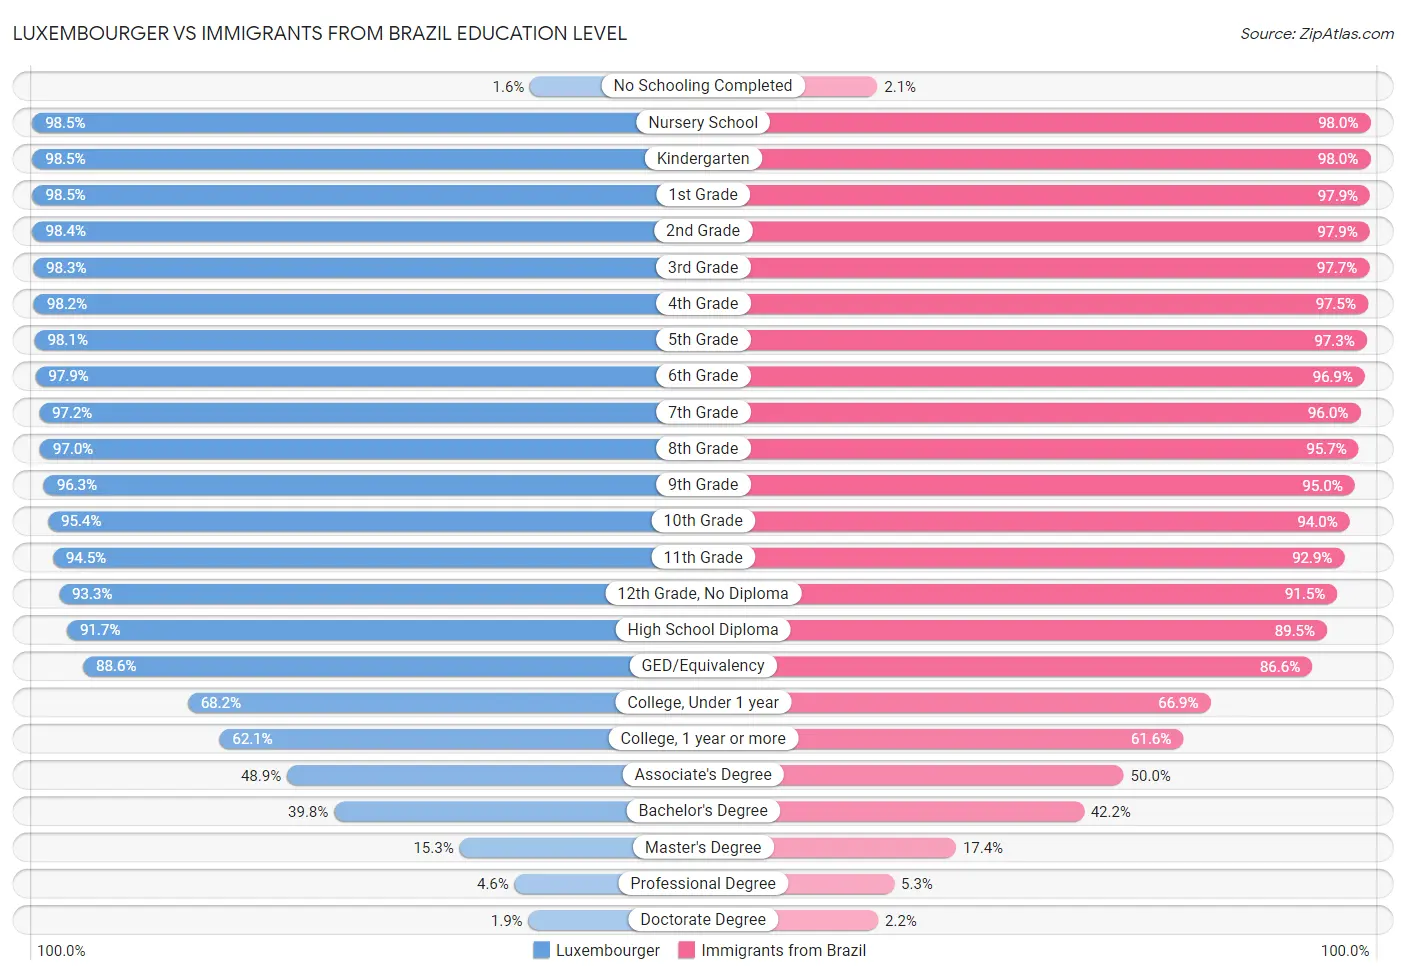 Luxembourger vs Immigrants from Brazil Education Level